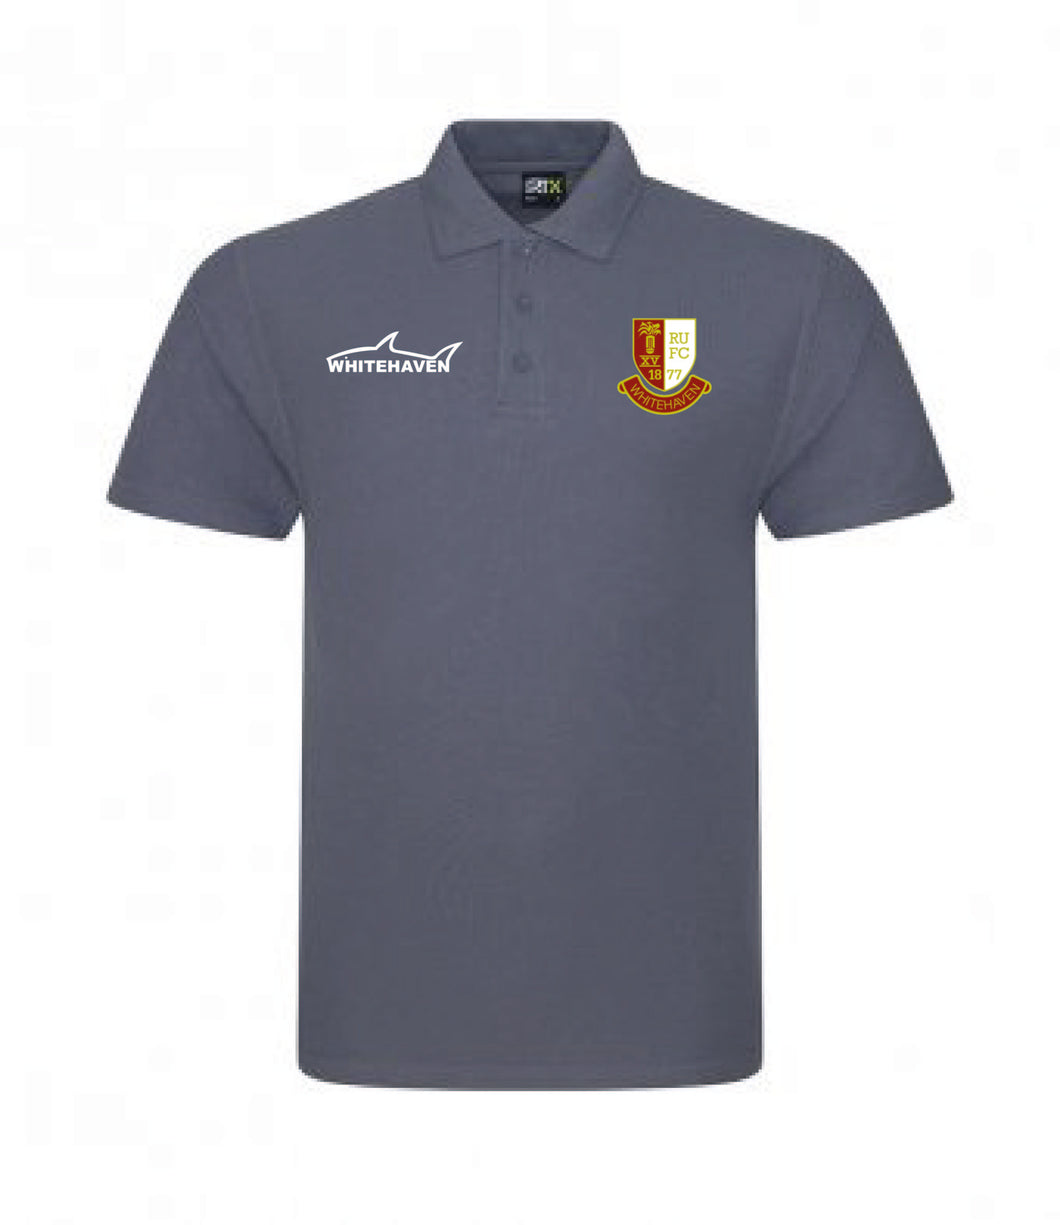 Whitehaven Sharks Adults Polo